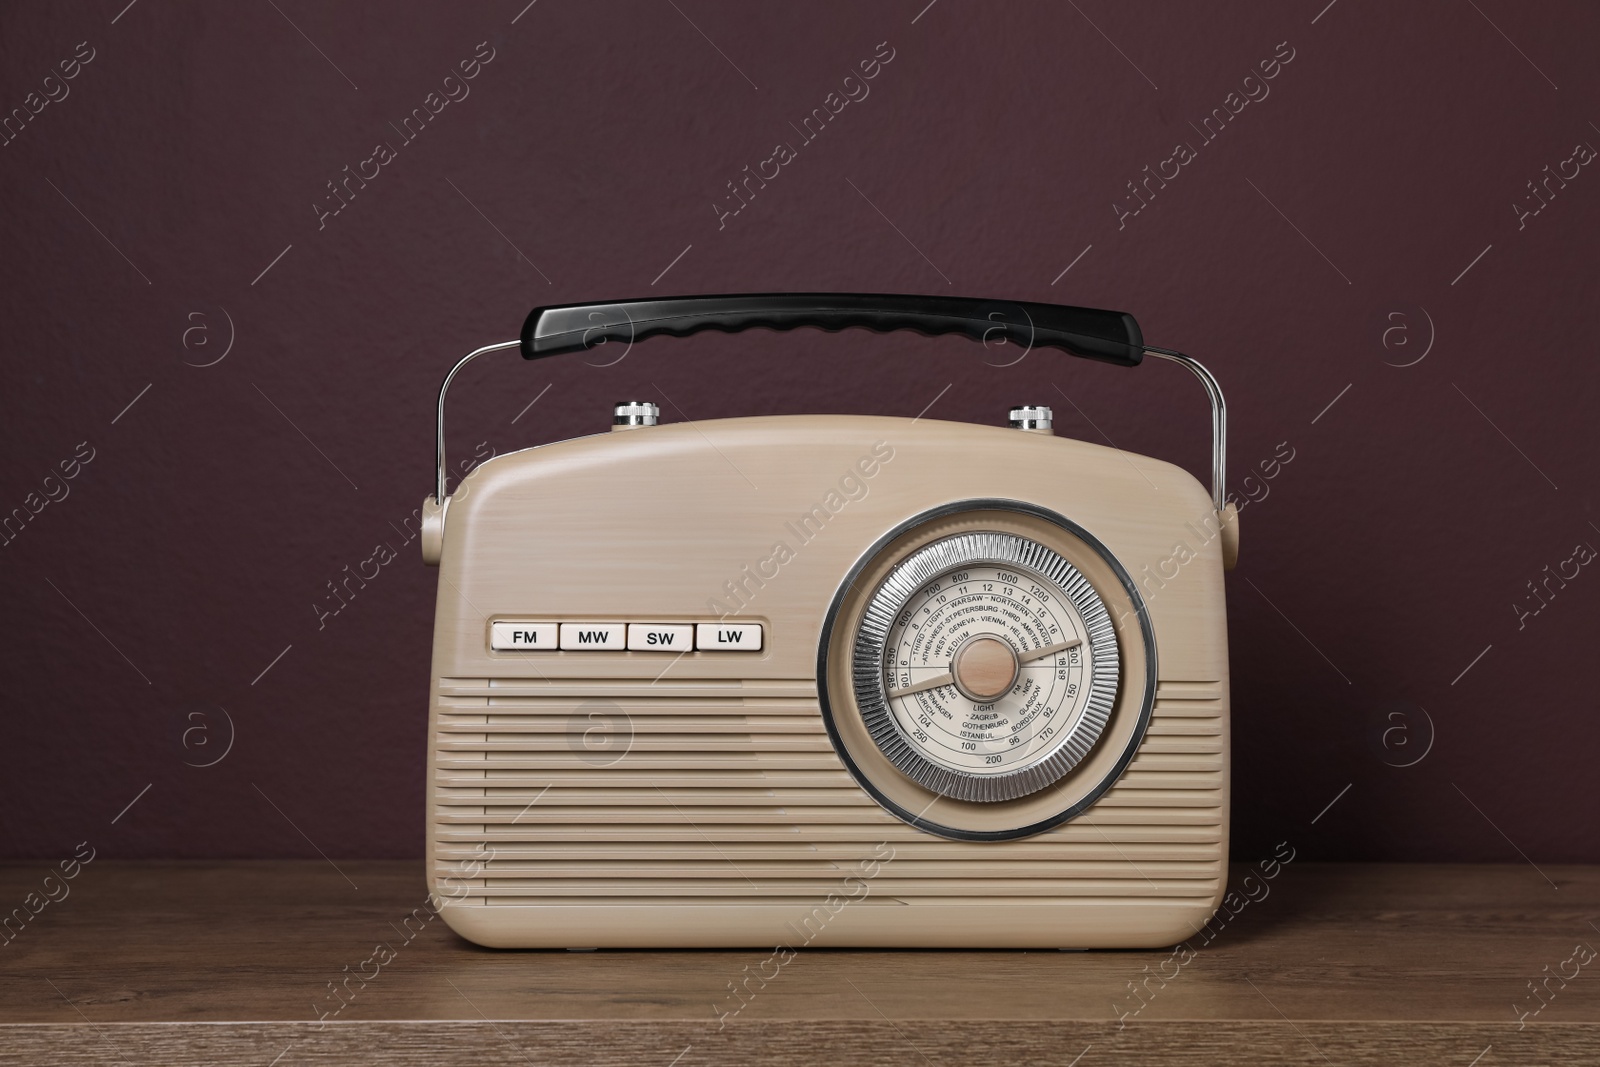 Photo of Retro radio receiver on wooden table against brown background